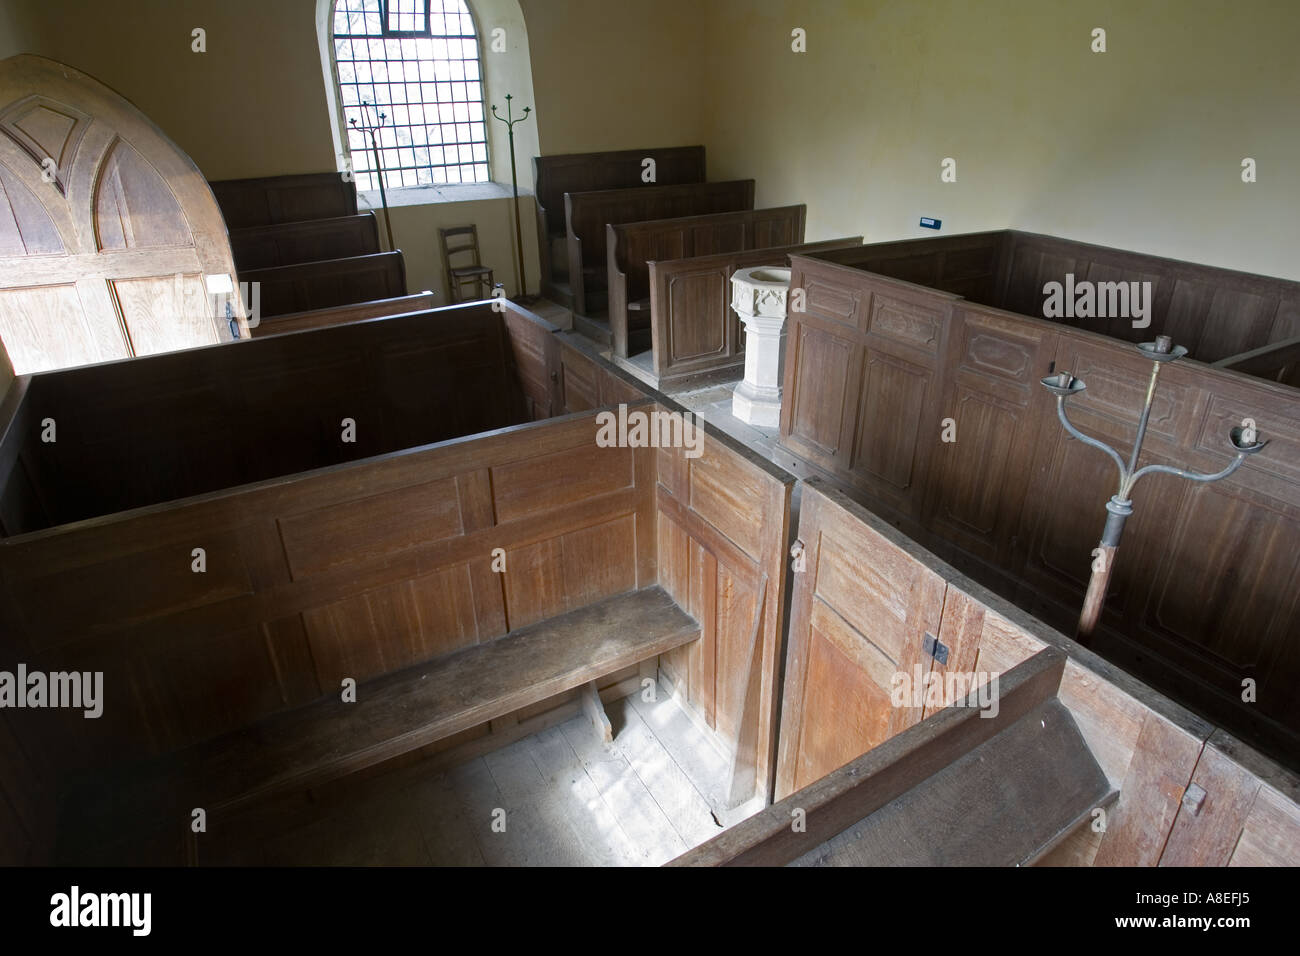 Box pews inside St Mary s church in Little Washbourne some 6 miles south of Evesham Worcs UK Stock Photo